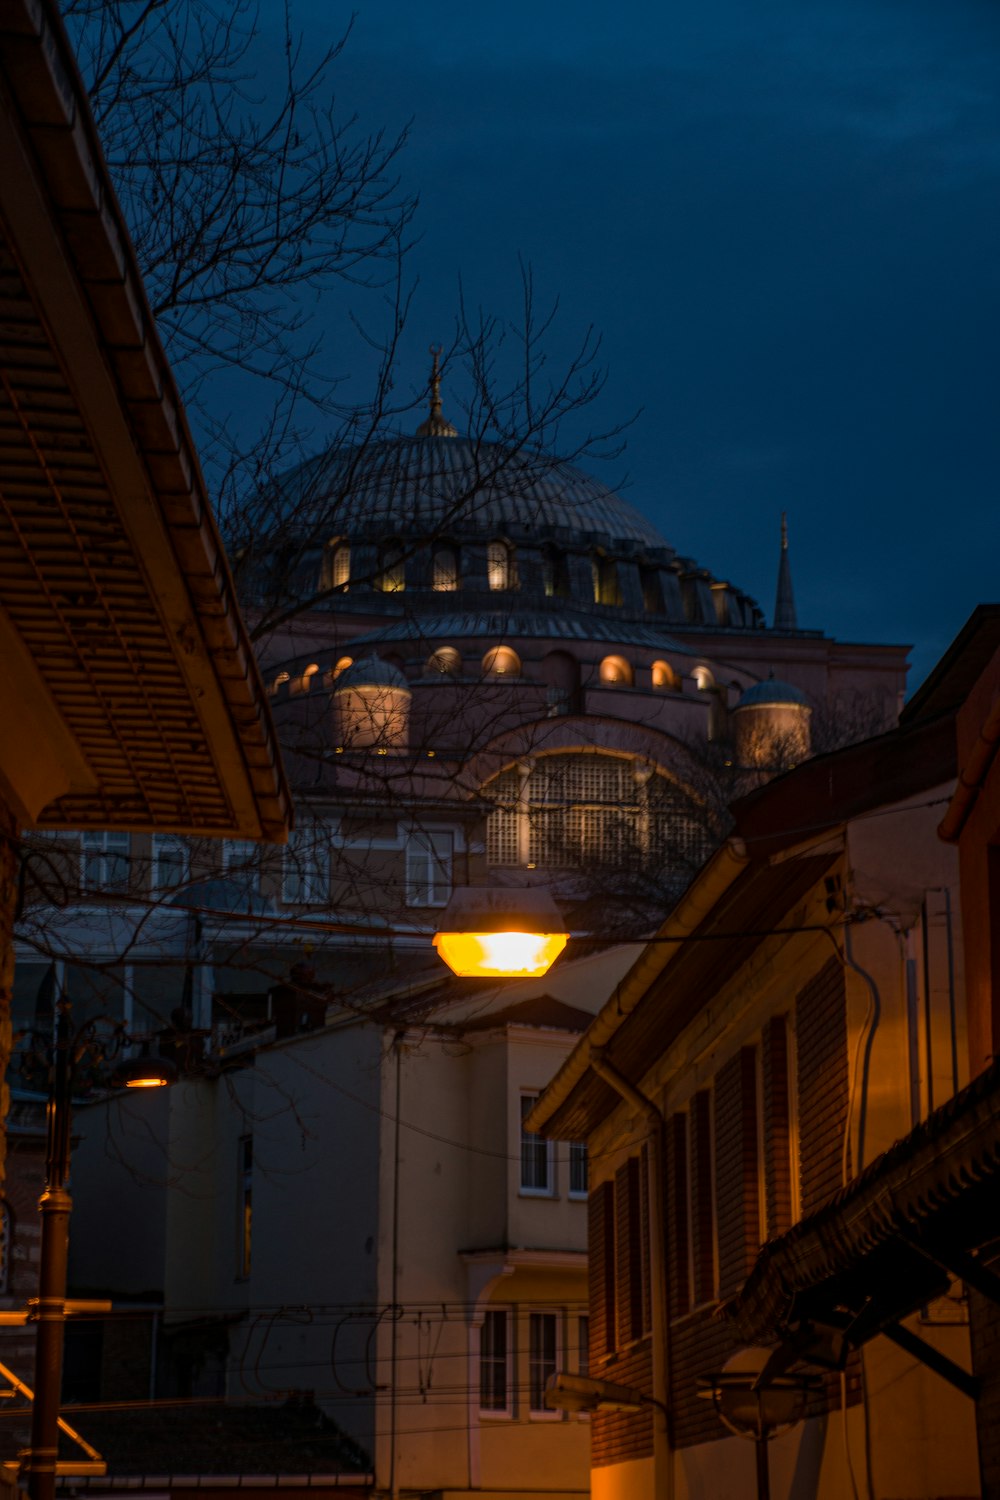 brown and white dome building during night time